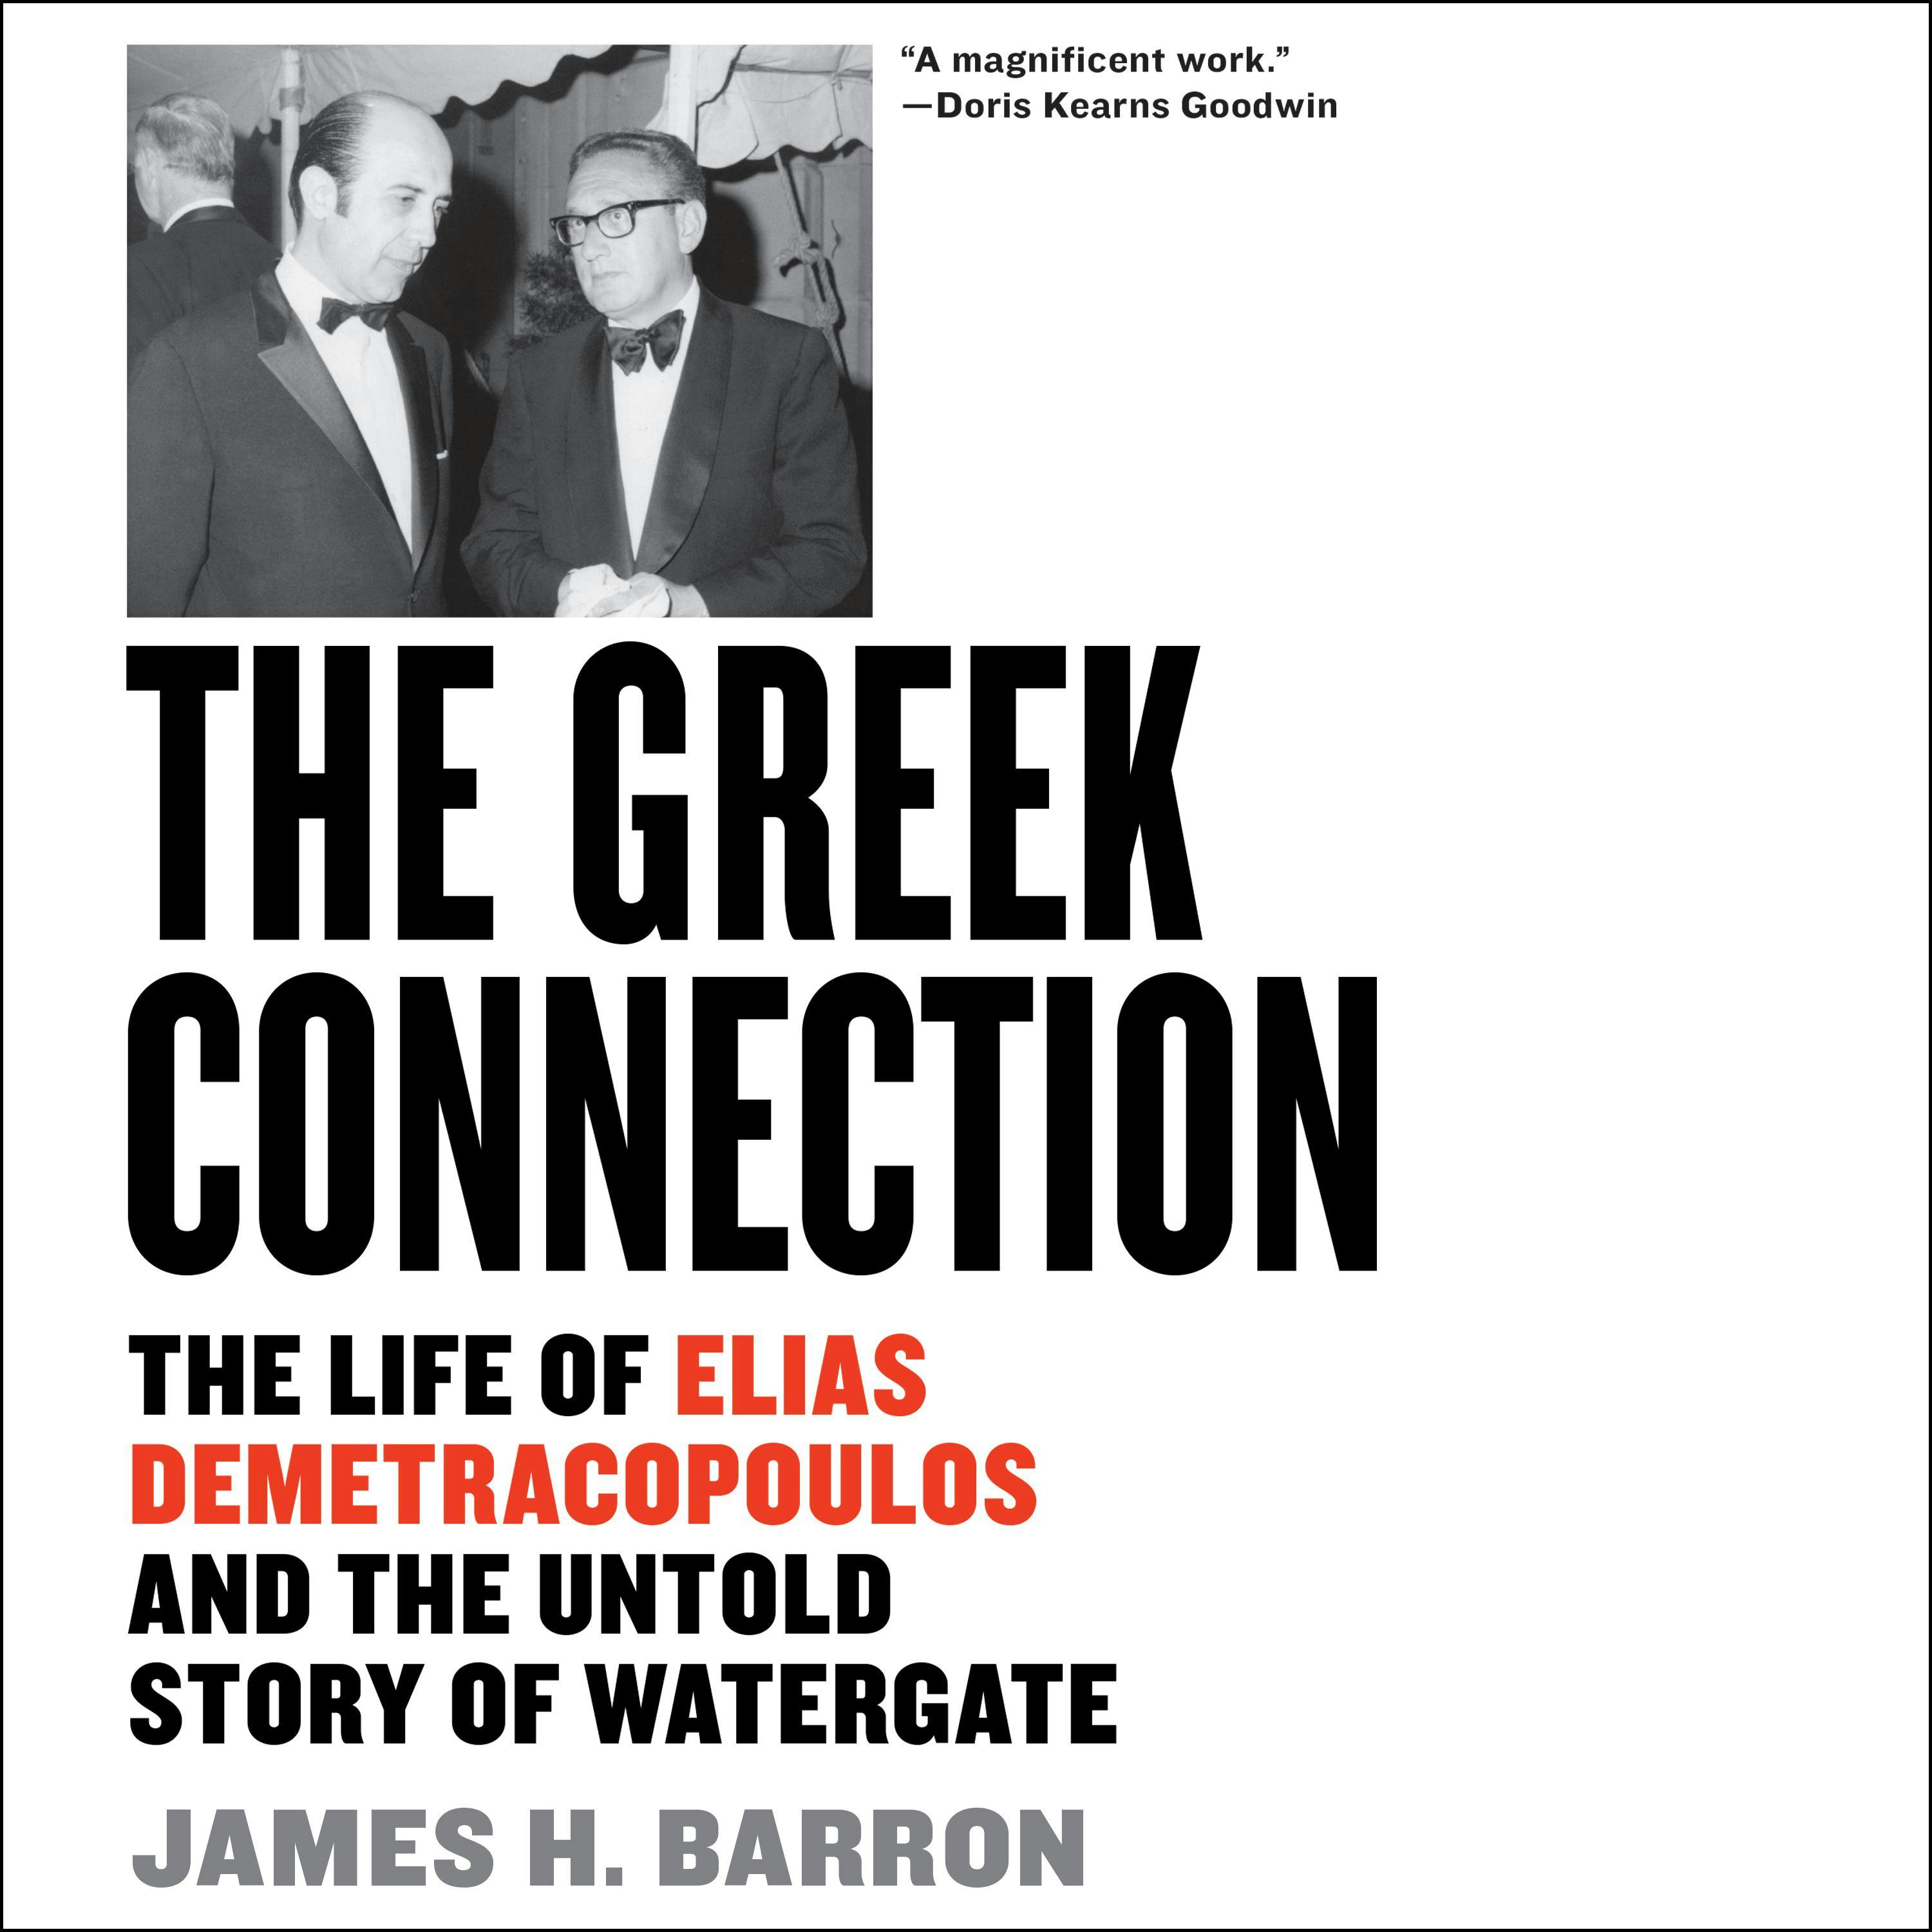 The Greek Connection: The Life of Elias Demetracopoulos and the Untold Story of Watergate - James H. Barron